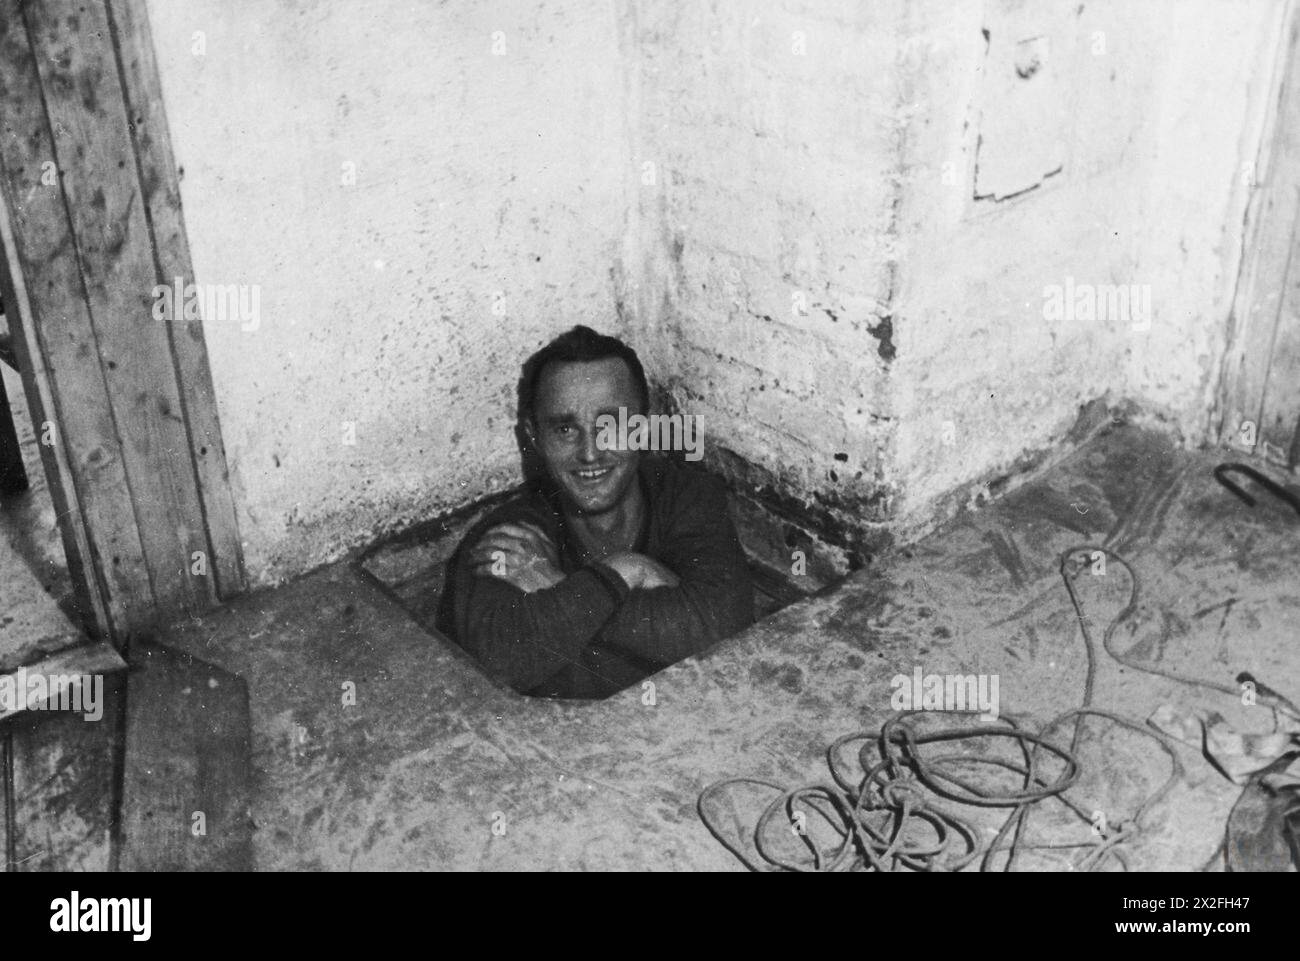 THE GREAT ESCAPE, MARCH 1944 - Corporal Karl Greise, one of the German guards known as 'Rubberneck', in the entrance to the escape tunnel 'Tom' at Stalag Luft III, Sagan. Photograph probably taken in September 1943 German Air Force, Greise, Karl Stock Photo